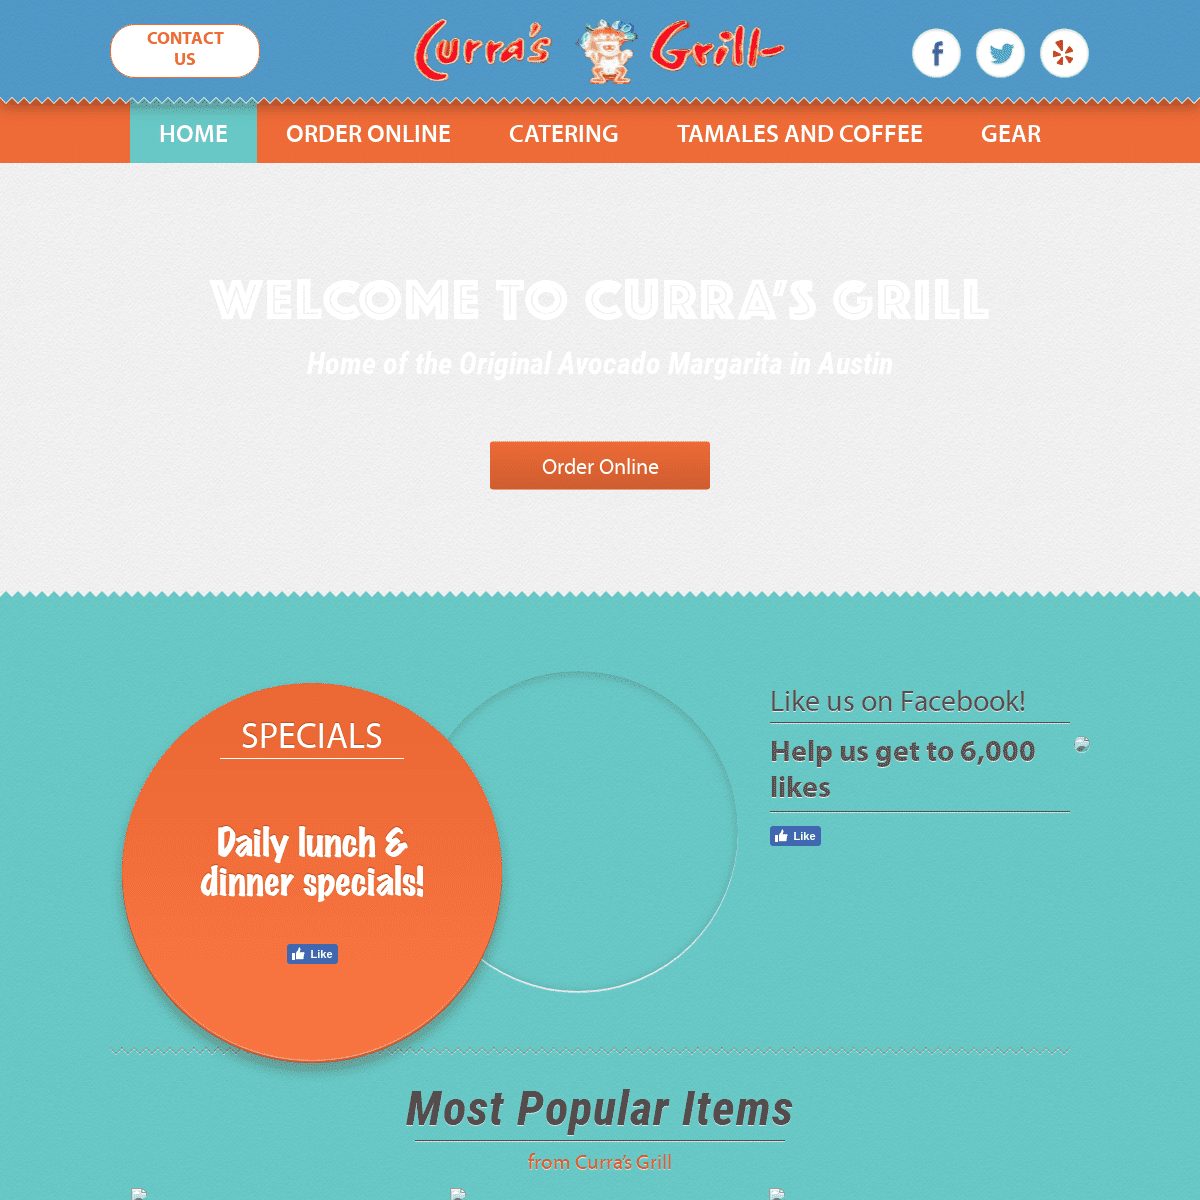 Curra's Grill Curra's Grill